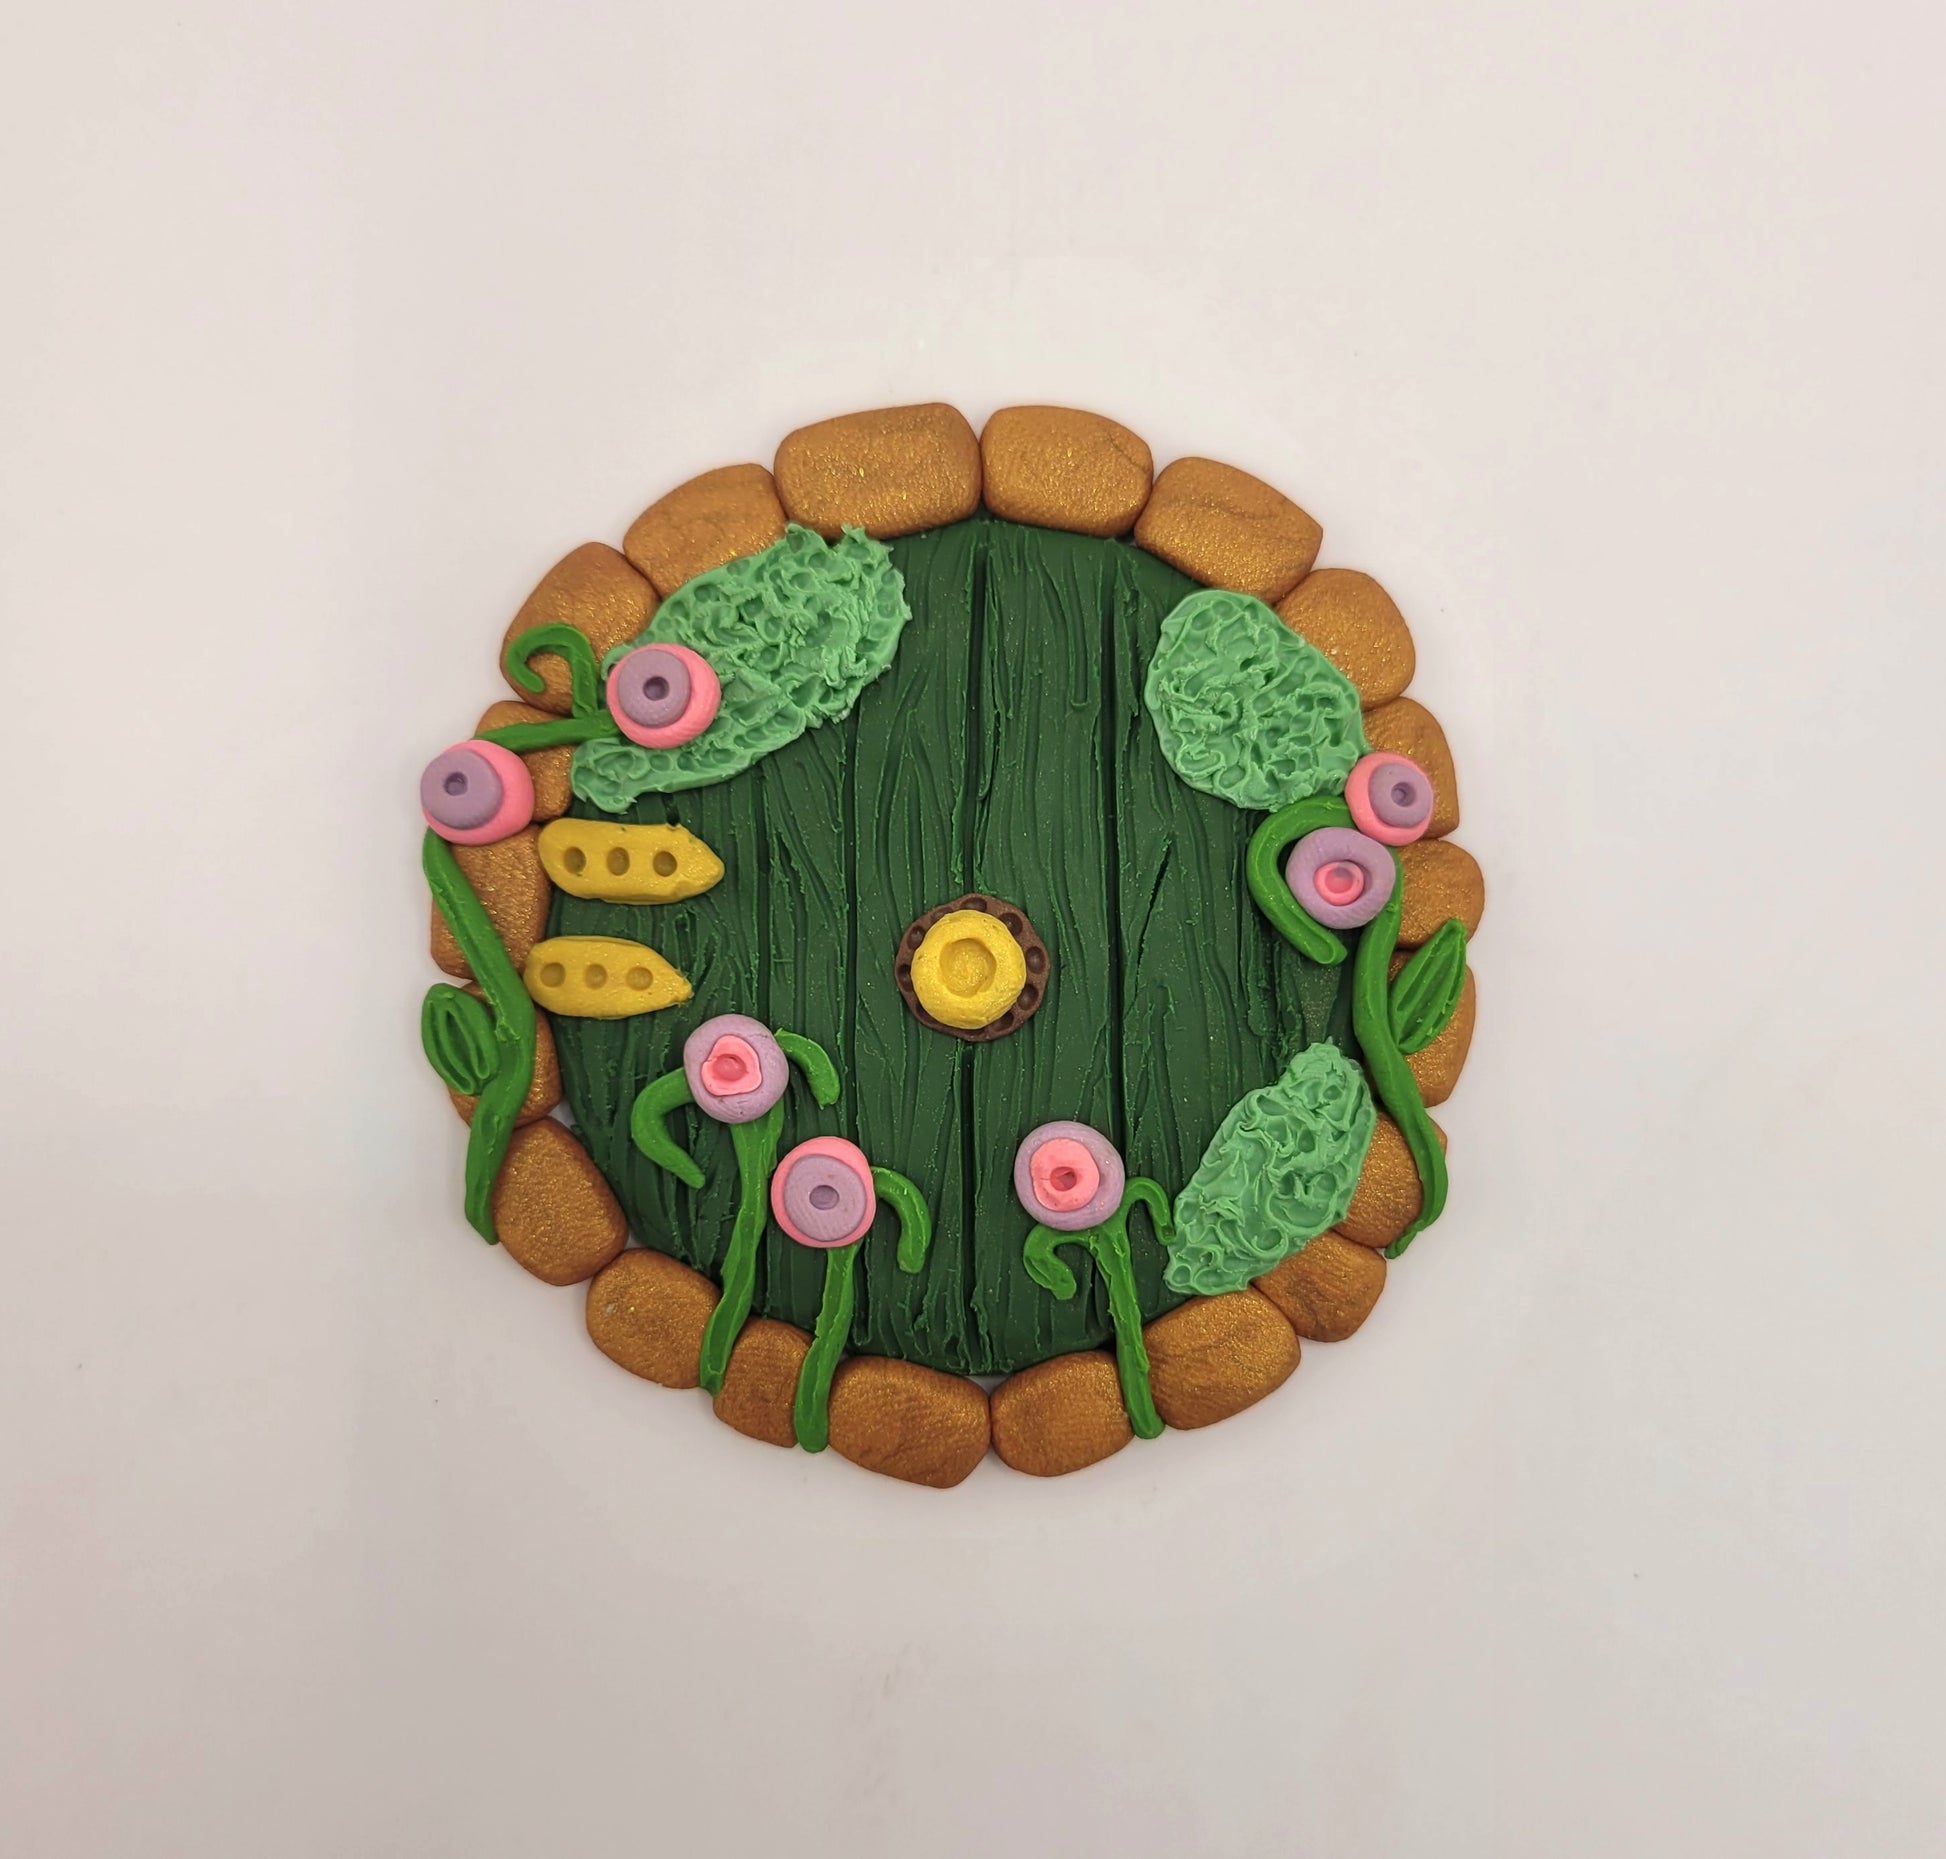 The Hobbit door rests on a white background. It is circular and green wood patterned with bronze brick finishes and golden hinges and a doorknob. It is detailed with green grass, moss and bright purple and pink flowers.